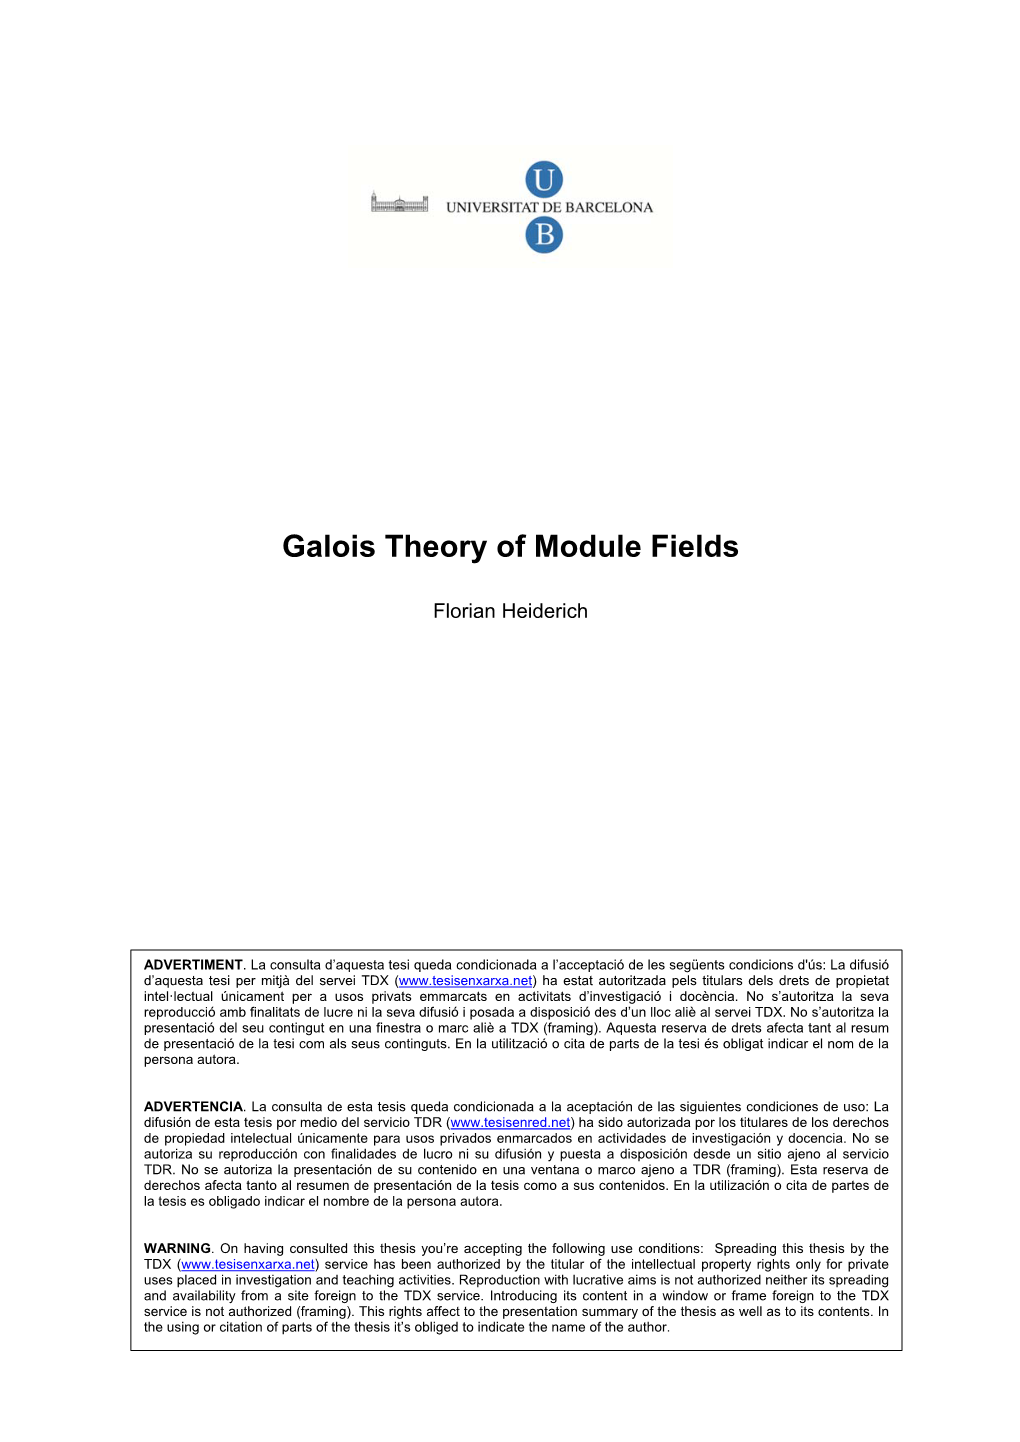 Galois Theory of Module Fields